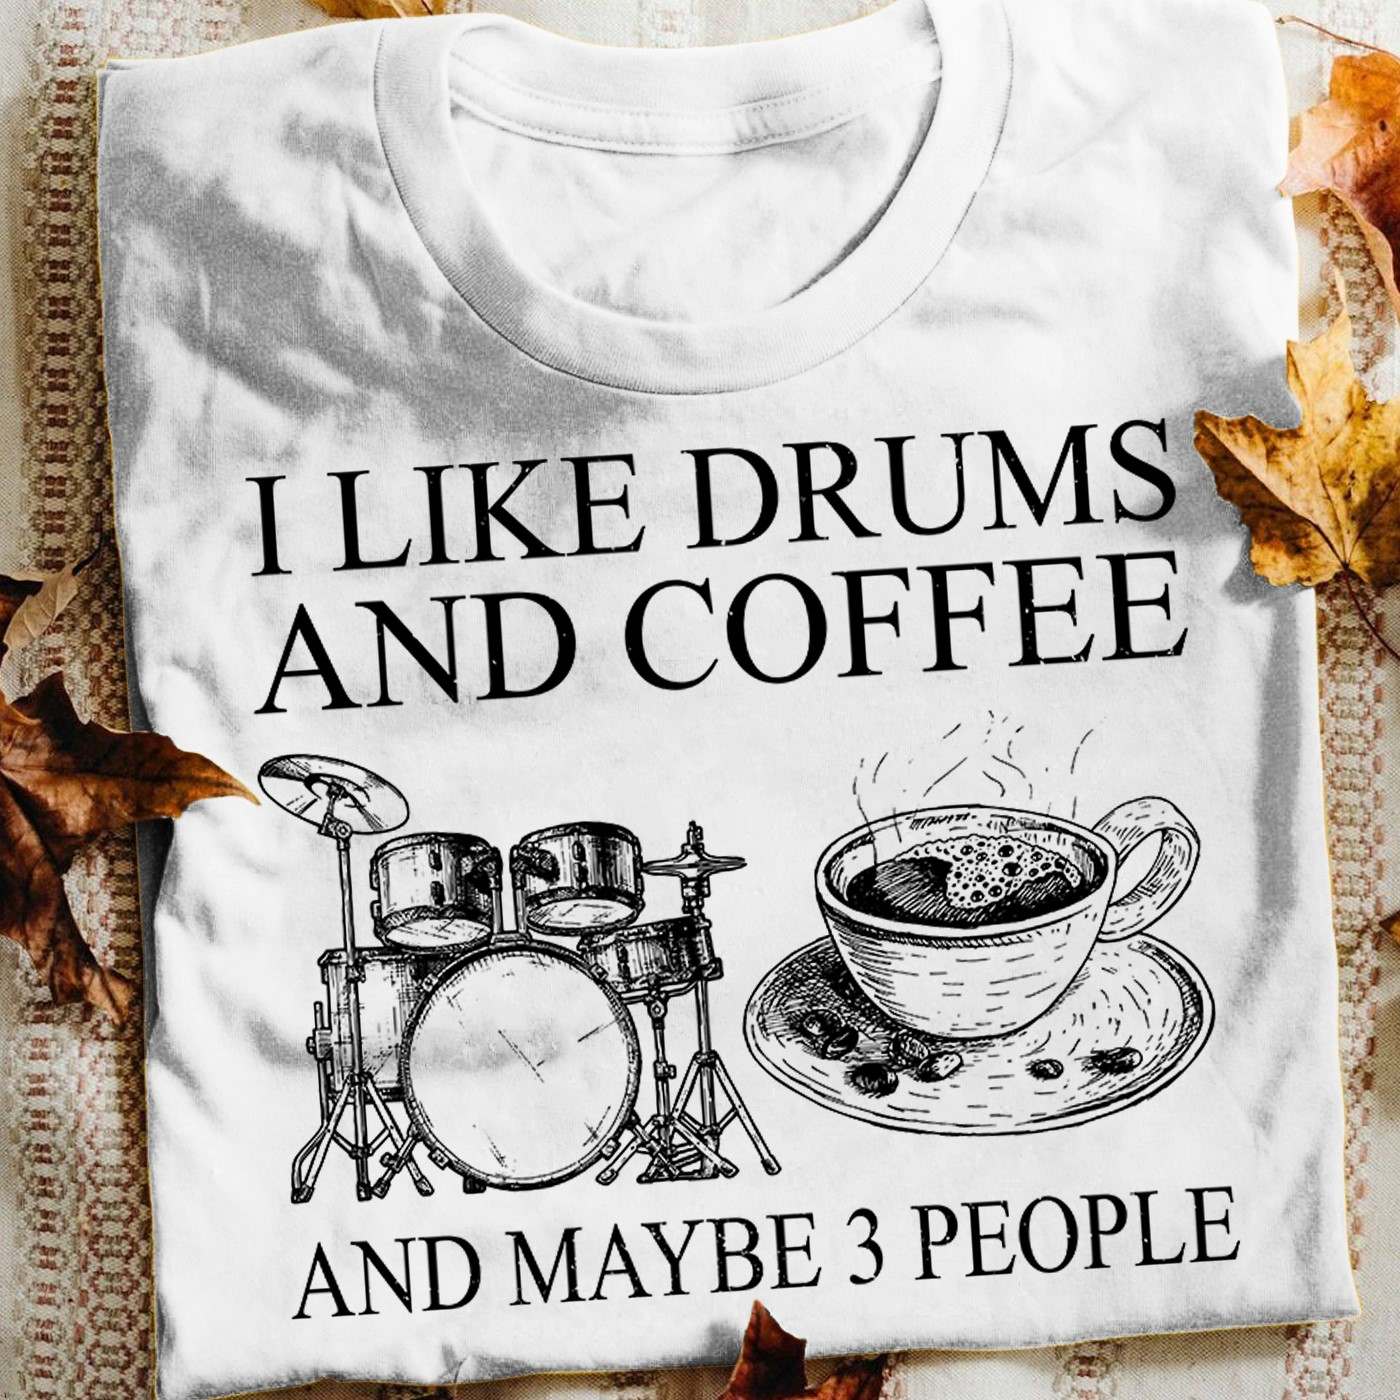 I like drums and coffee and maybe 3 people